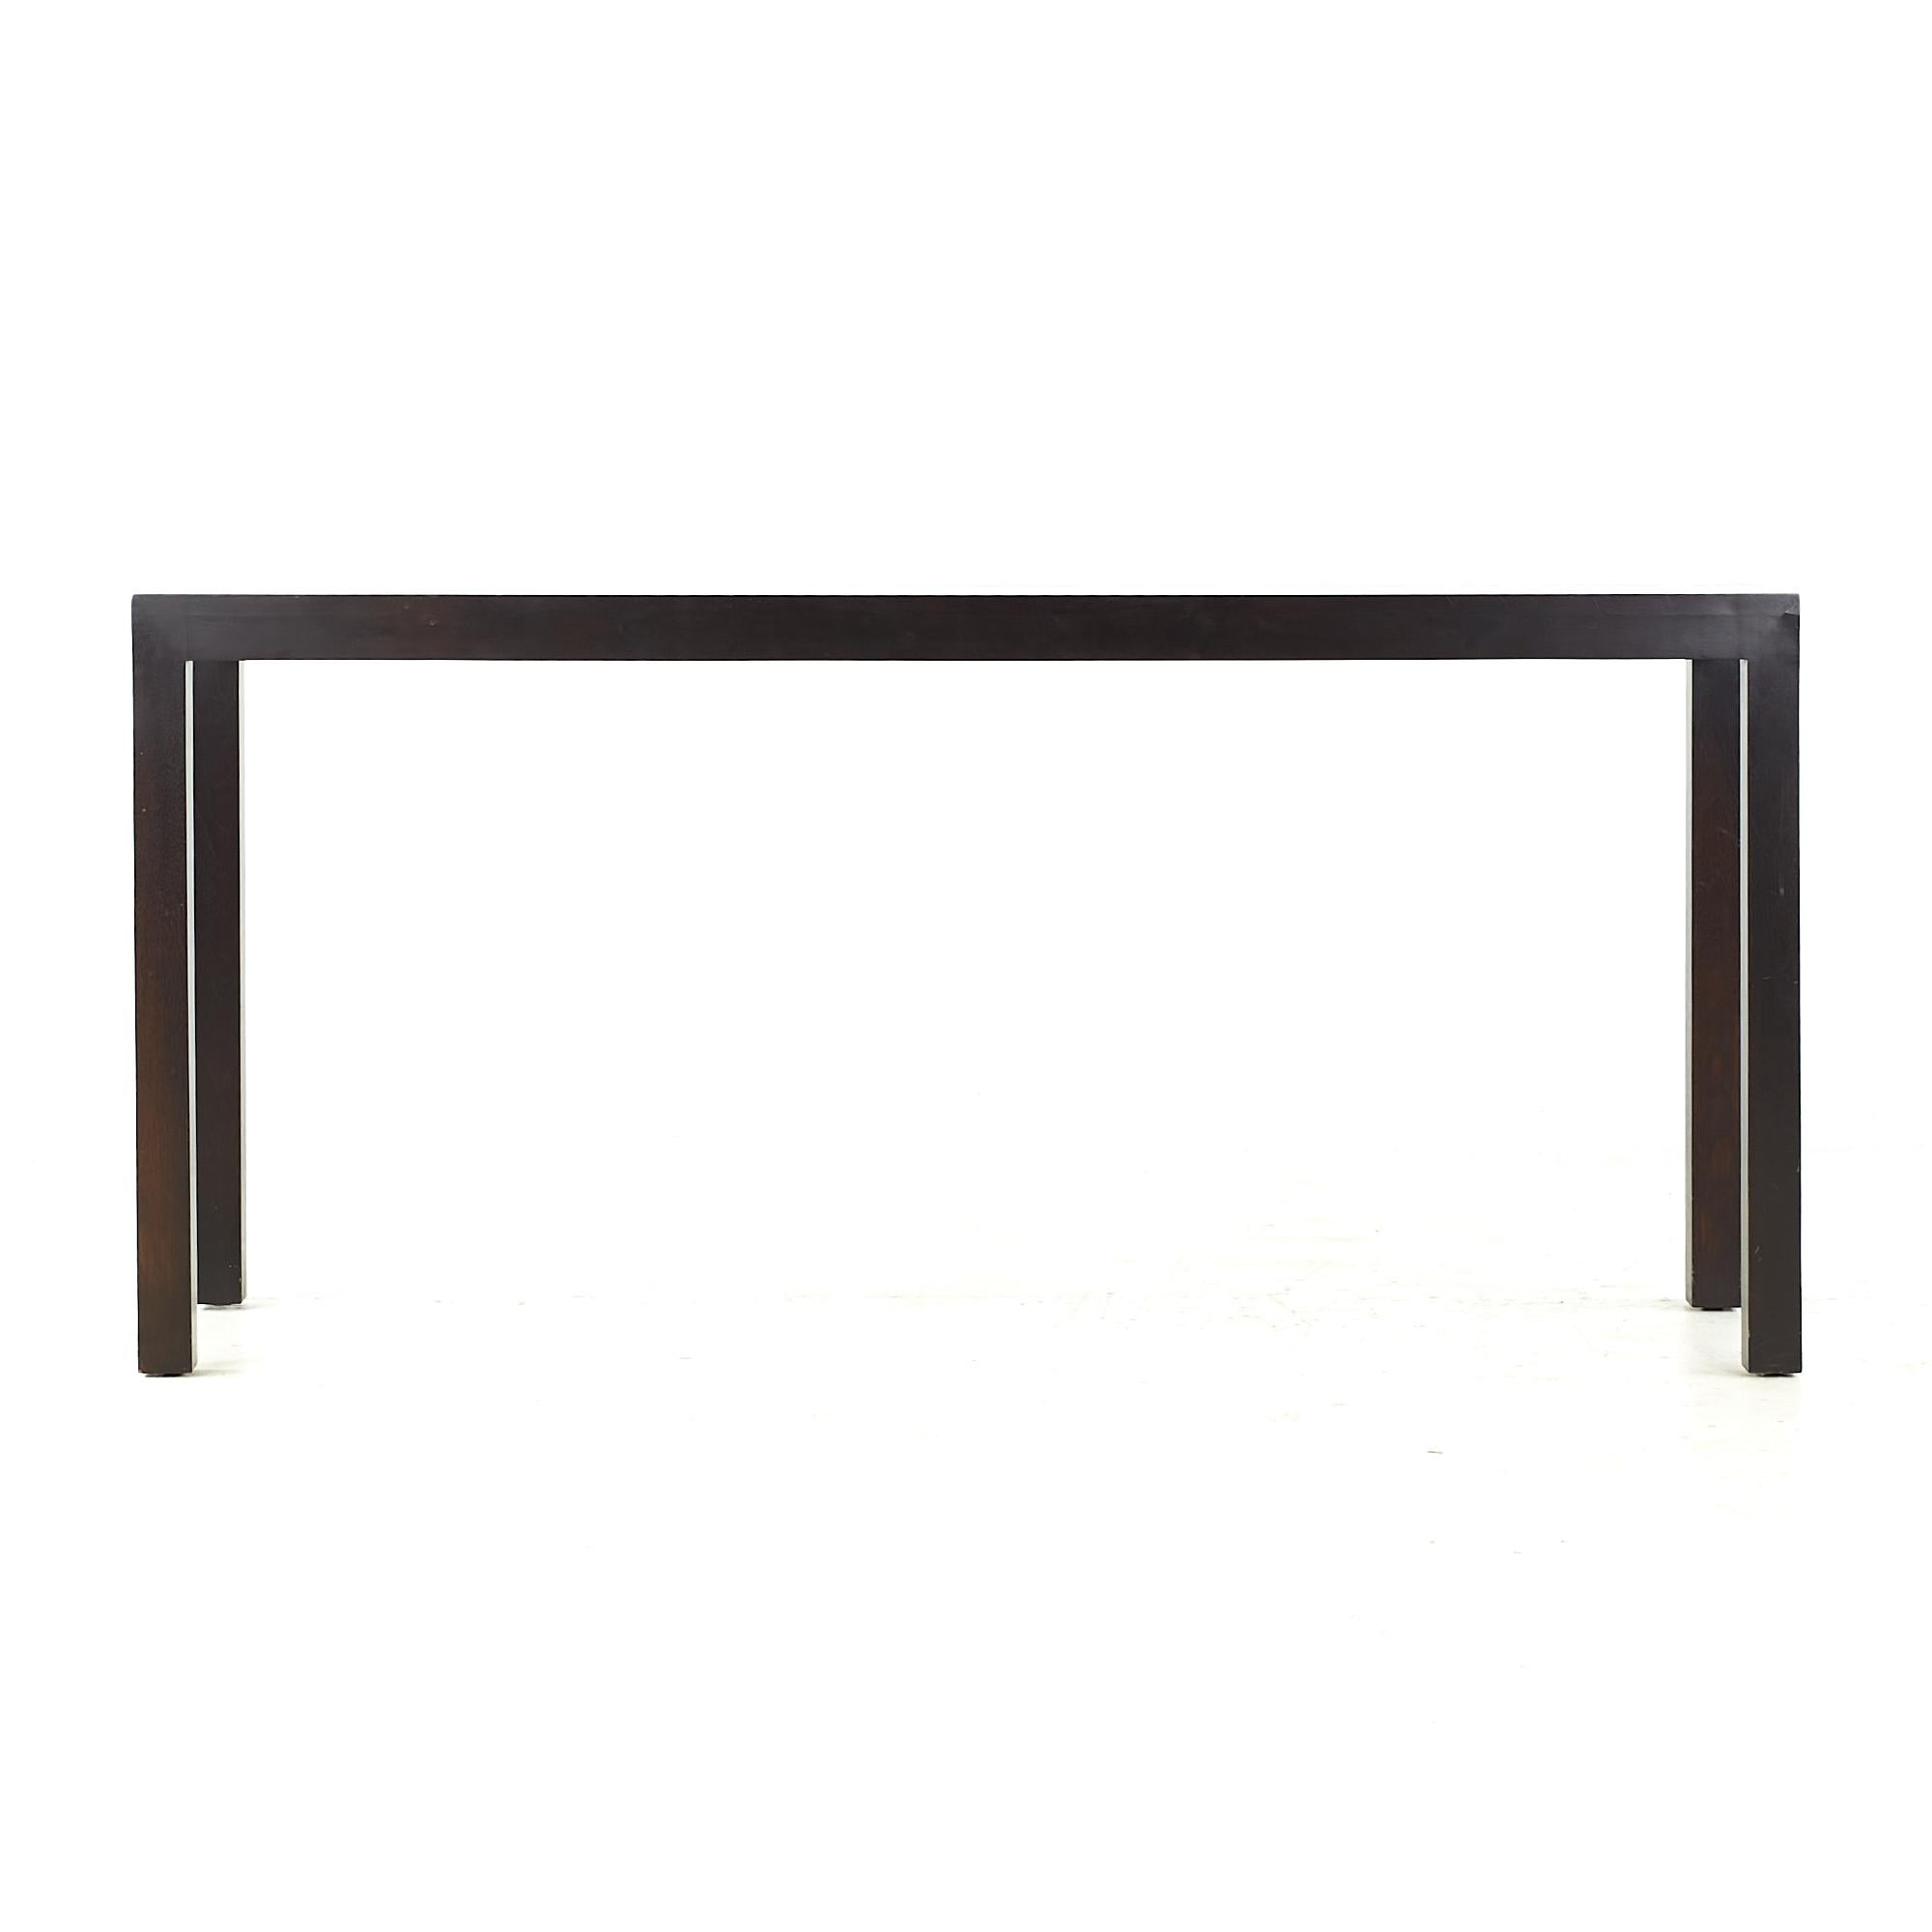 Dunbar midcentury mahogany console table

This console table measures: 60 wide x 17 deep x 28 high, with a chair clearance of 25.75 inches

All pieces of furniture can be had in what we call restored vintage condition. That means the piece is